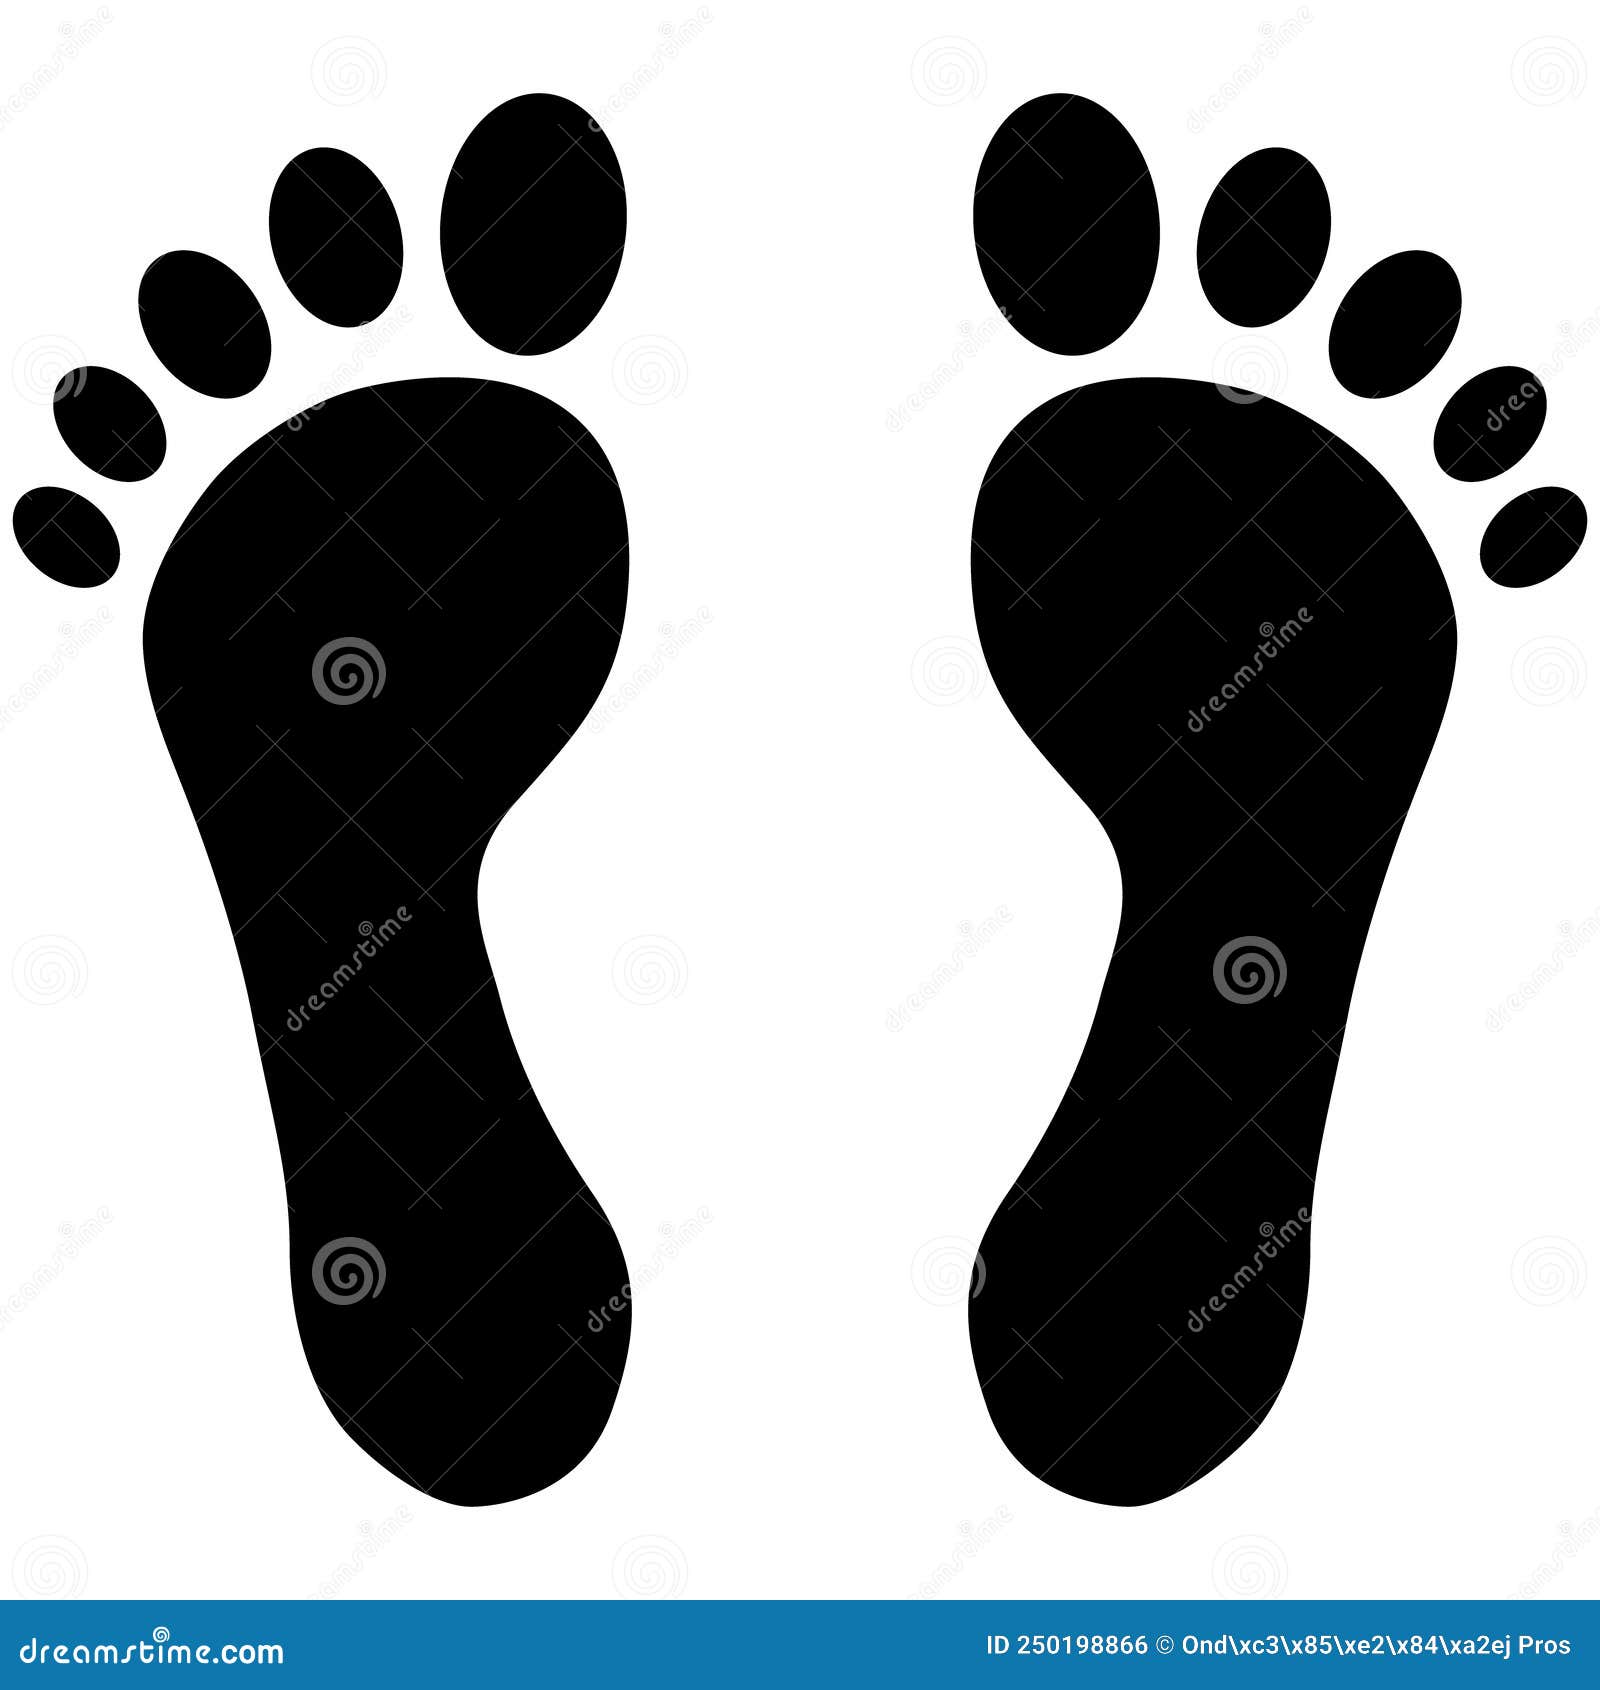 Foot Print Human Sign, Track Walking Design Icon, Outline Vector ...